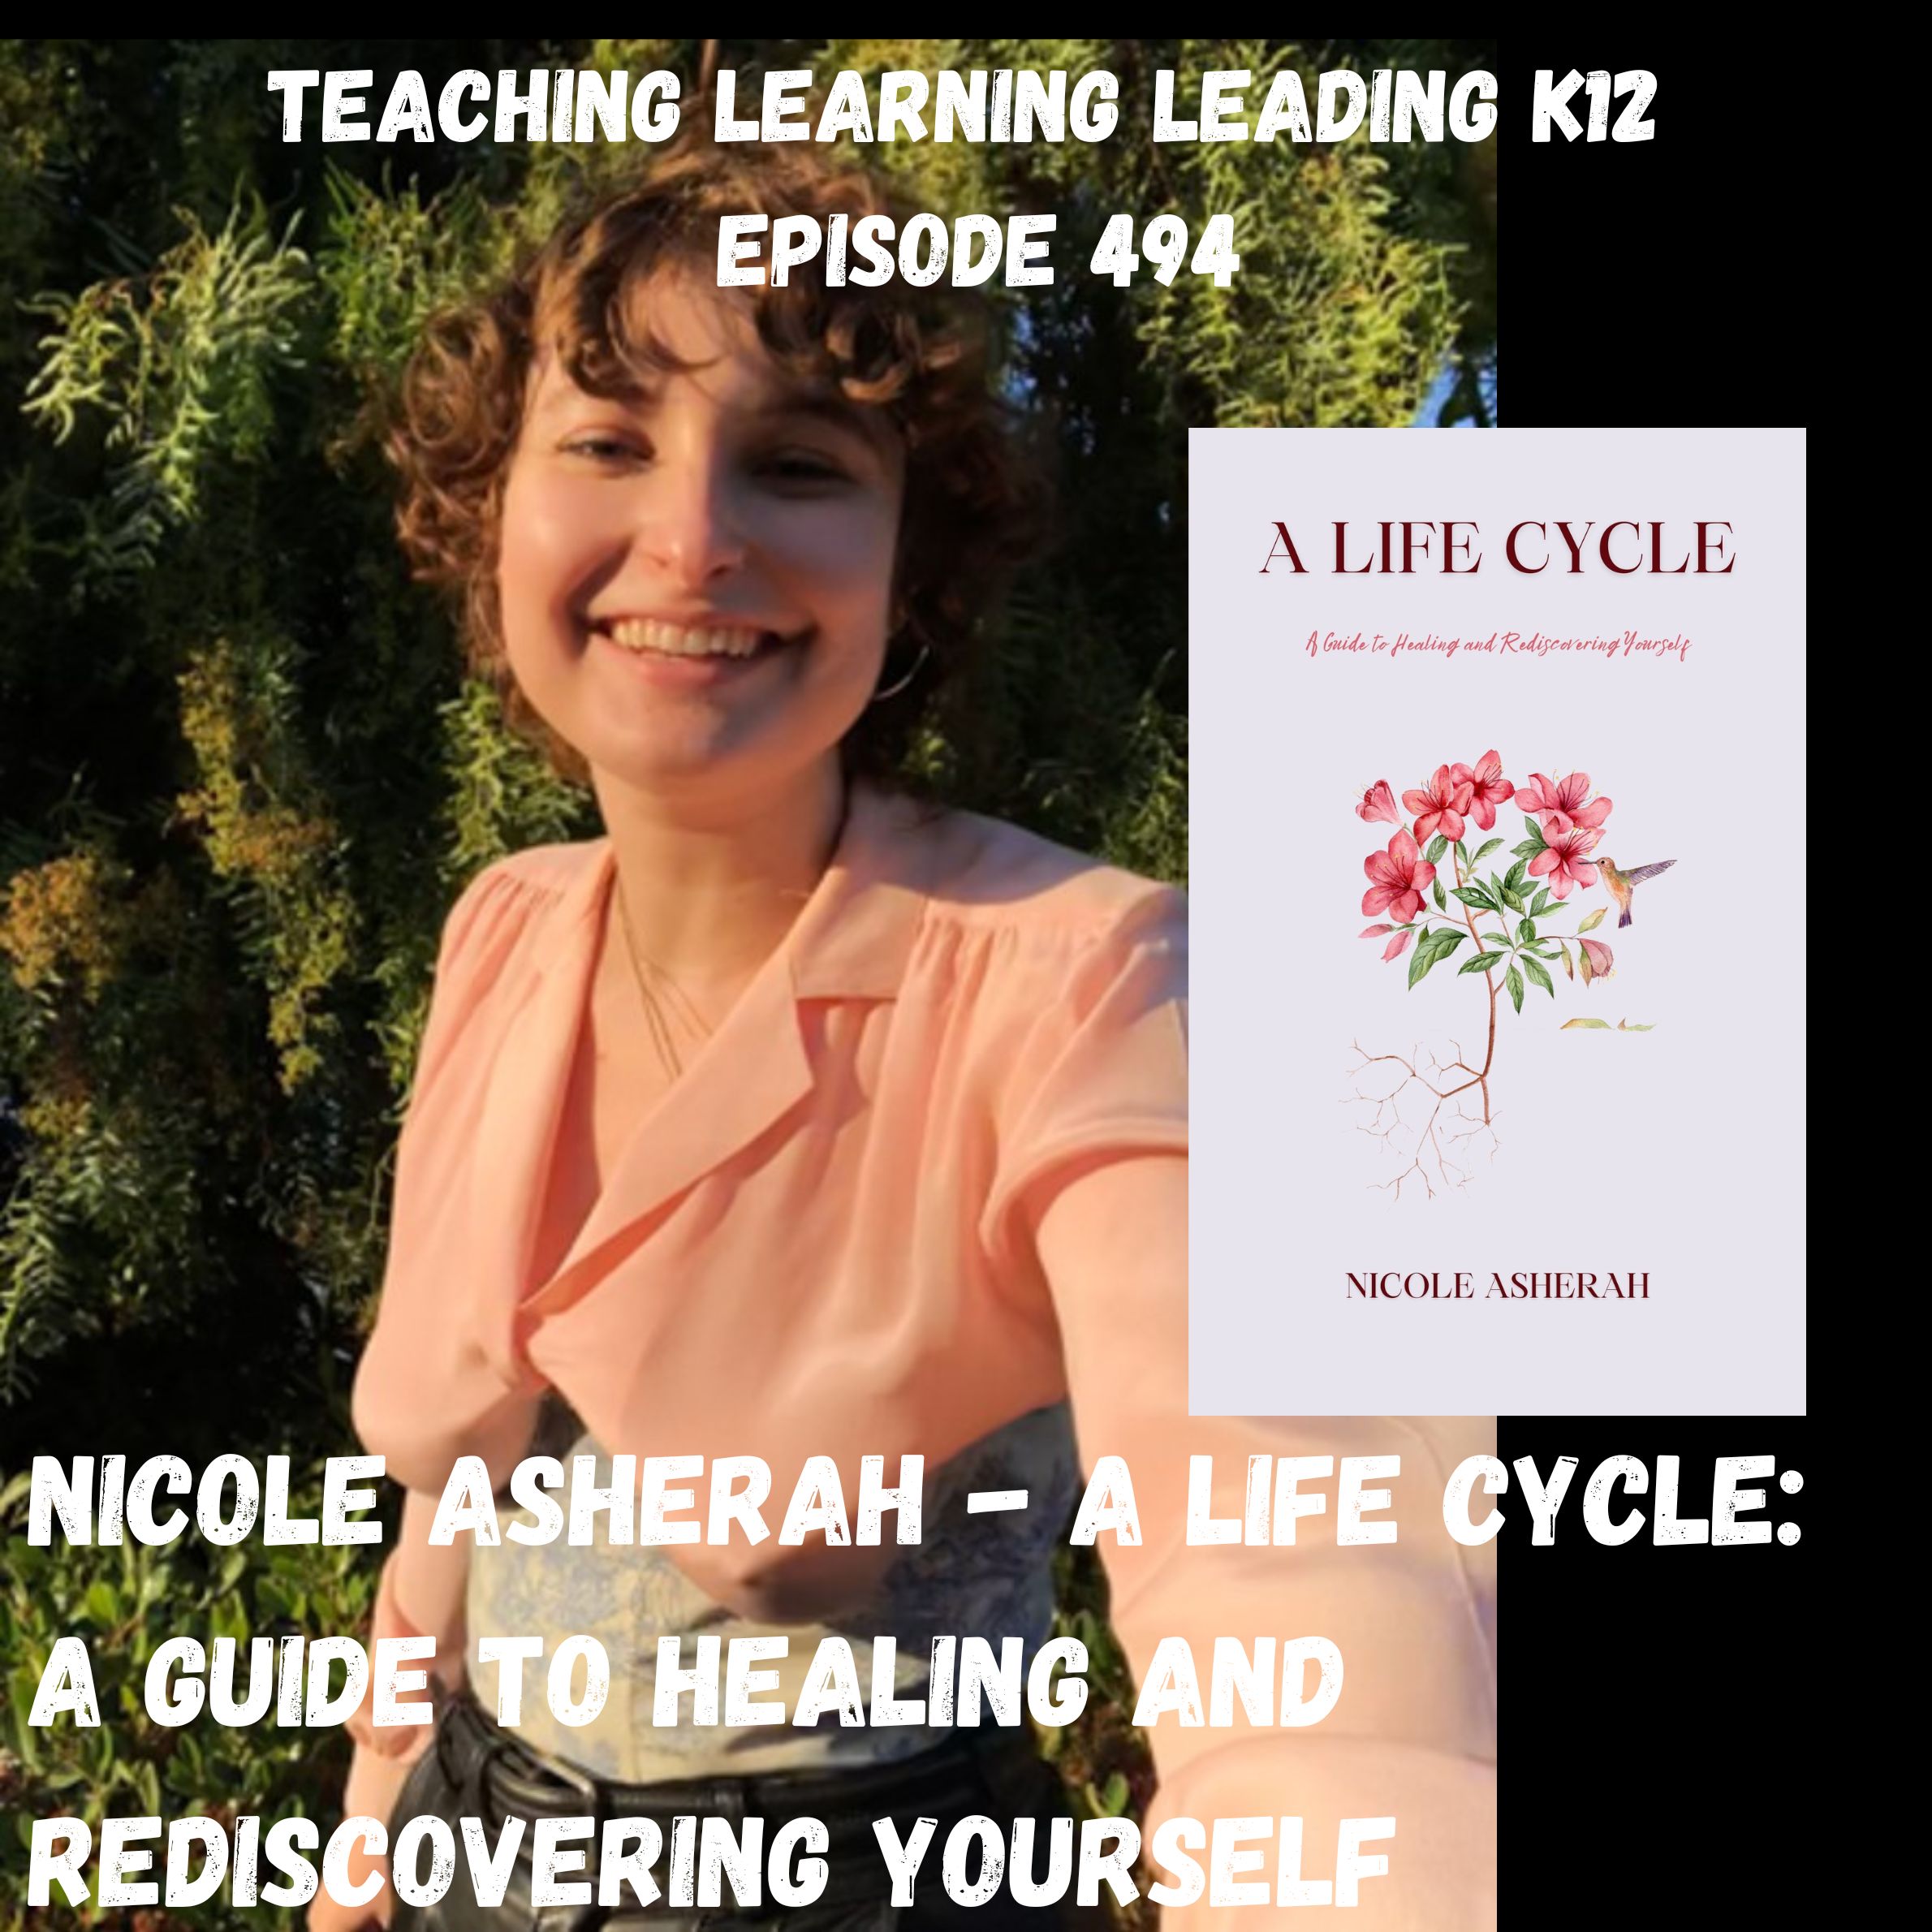 Nicole Asherah - A Life Cycle: A Guide to Healing and Rediscovering Yourself - 494